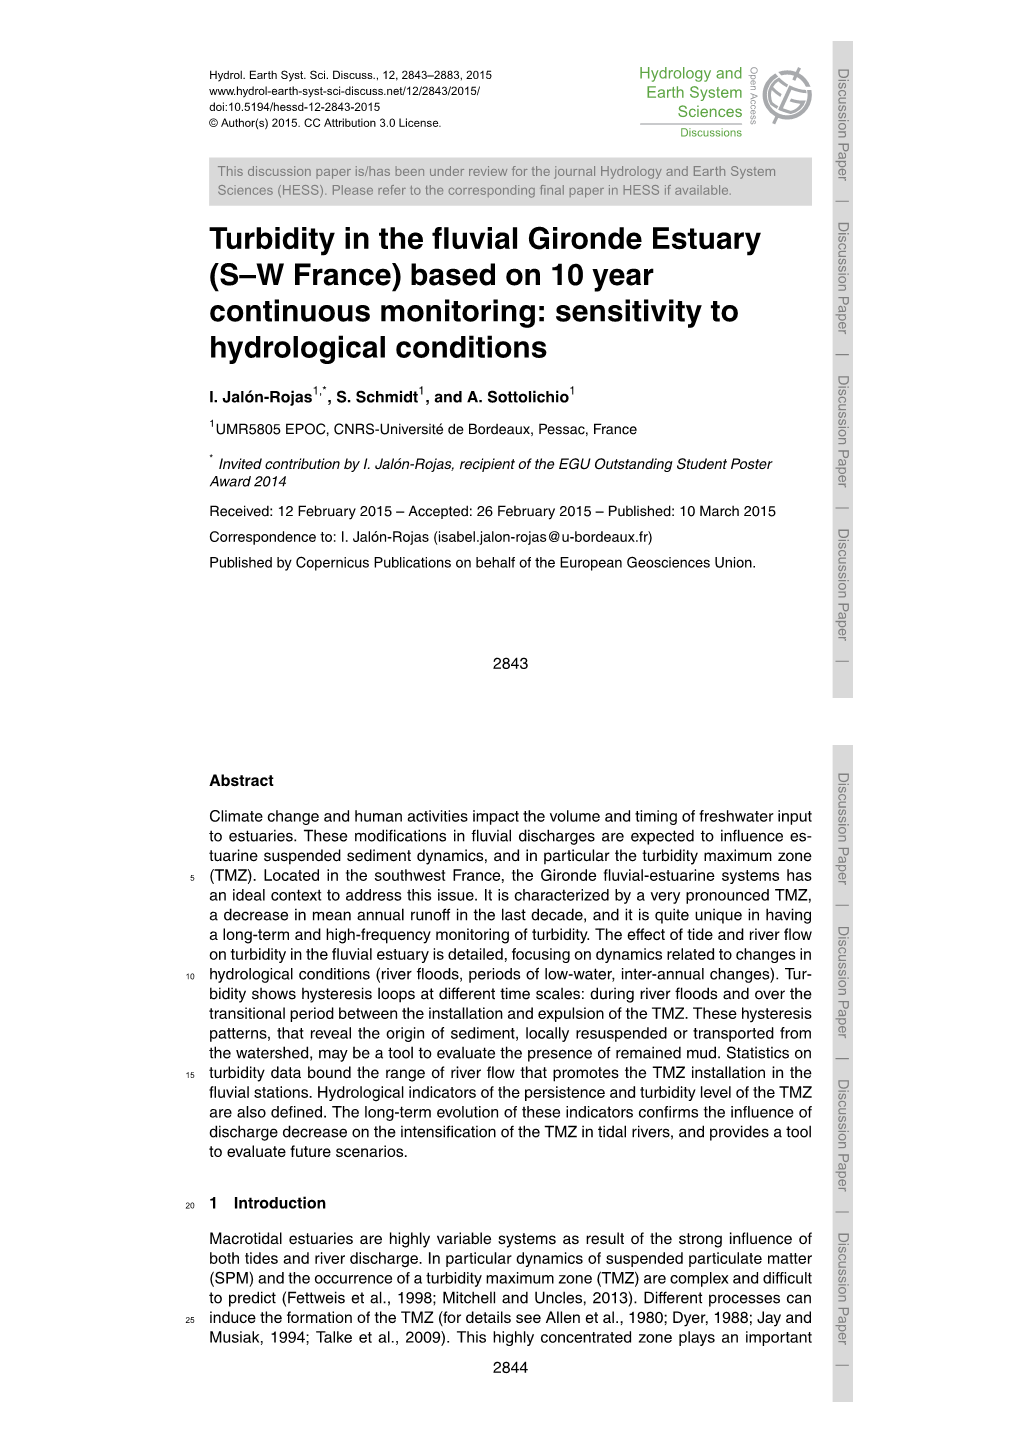 Turbidity in the Fluvial Gironde Estuary (S–W France) Based on 10 Year